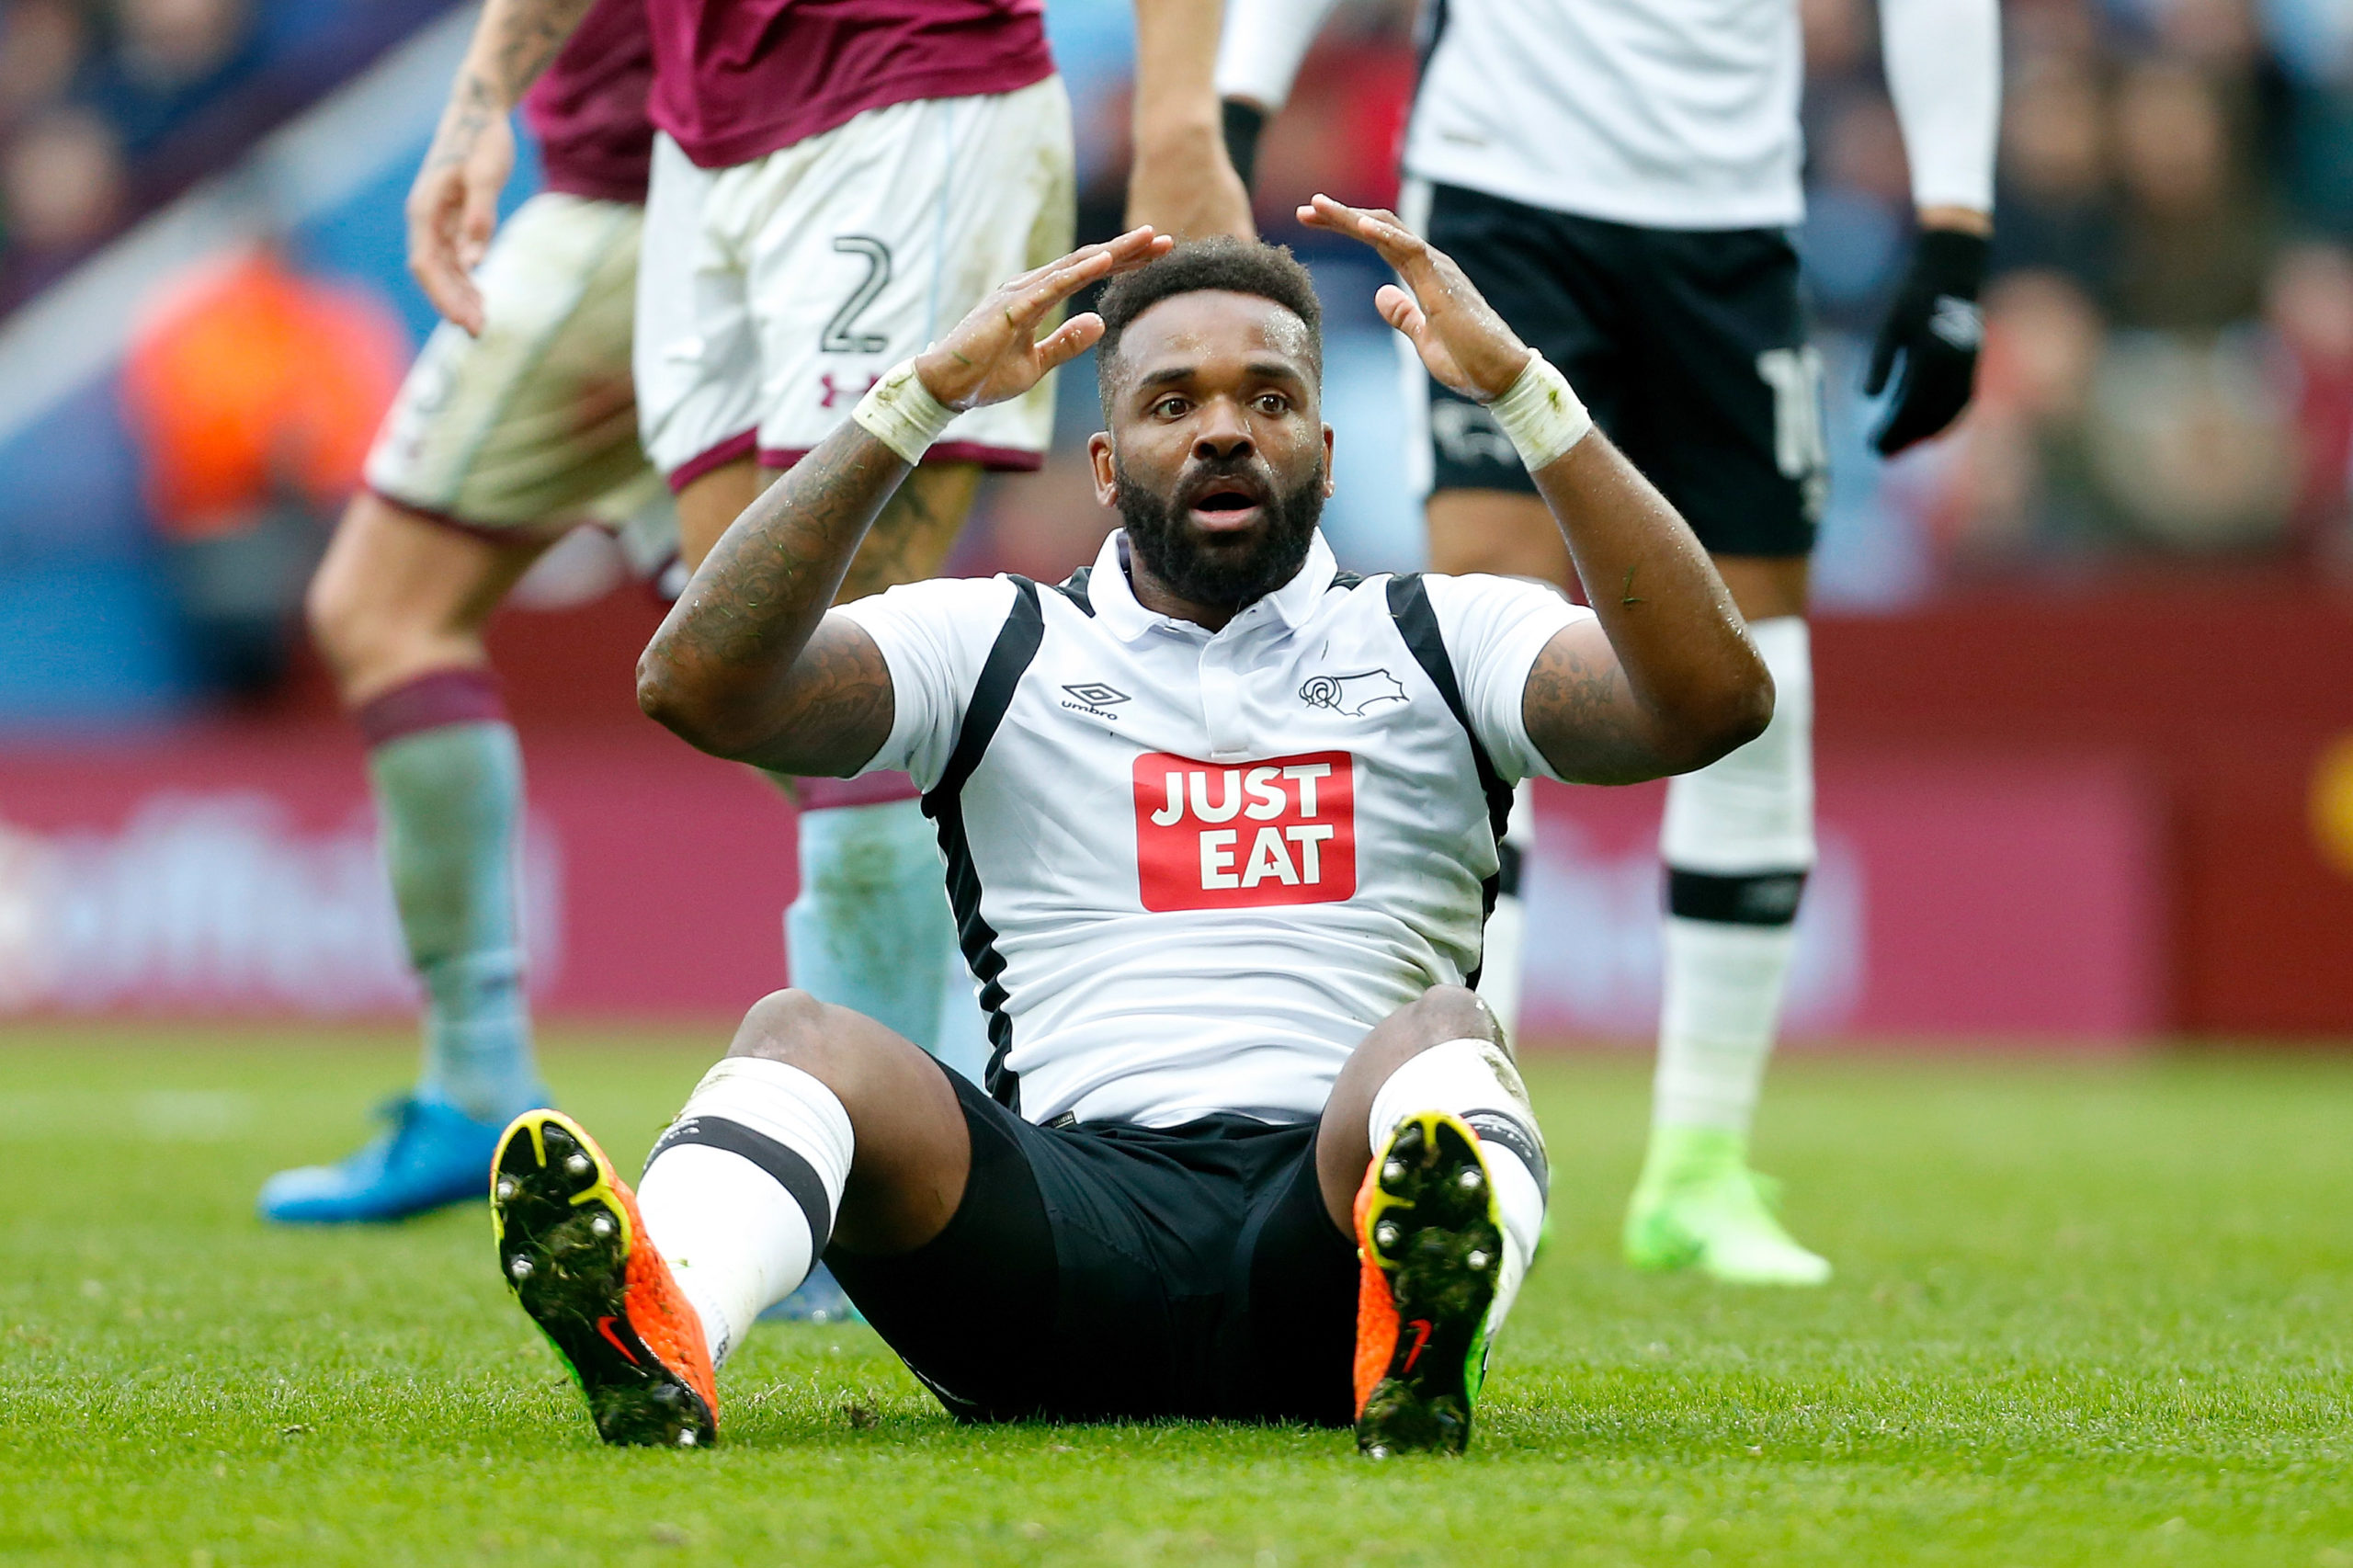 'For sure': Darren Bent makes claim about what Chelsea will do in the next five years